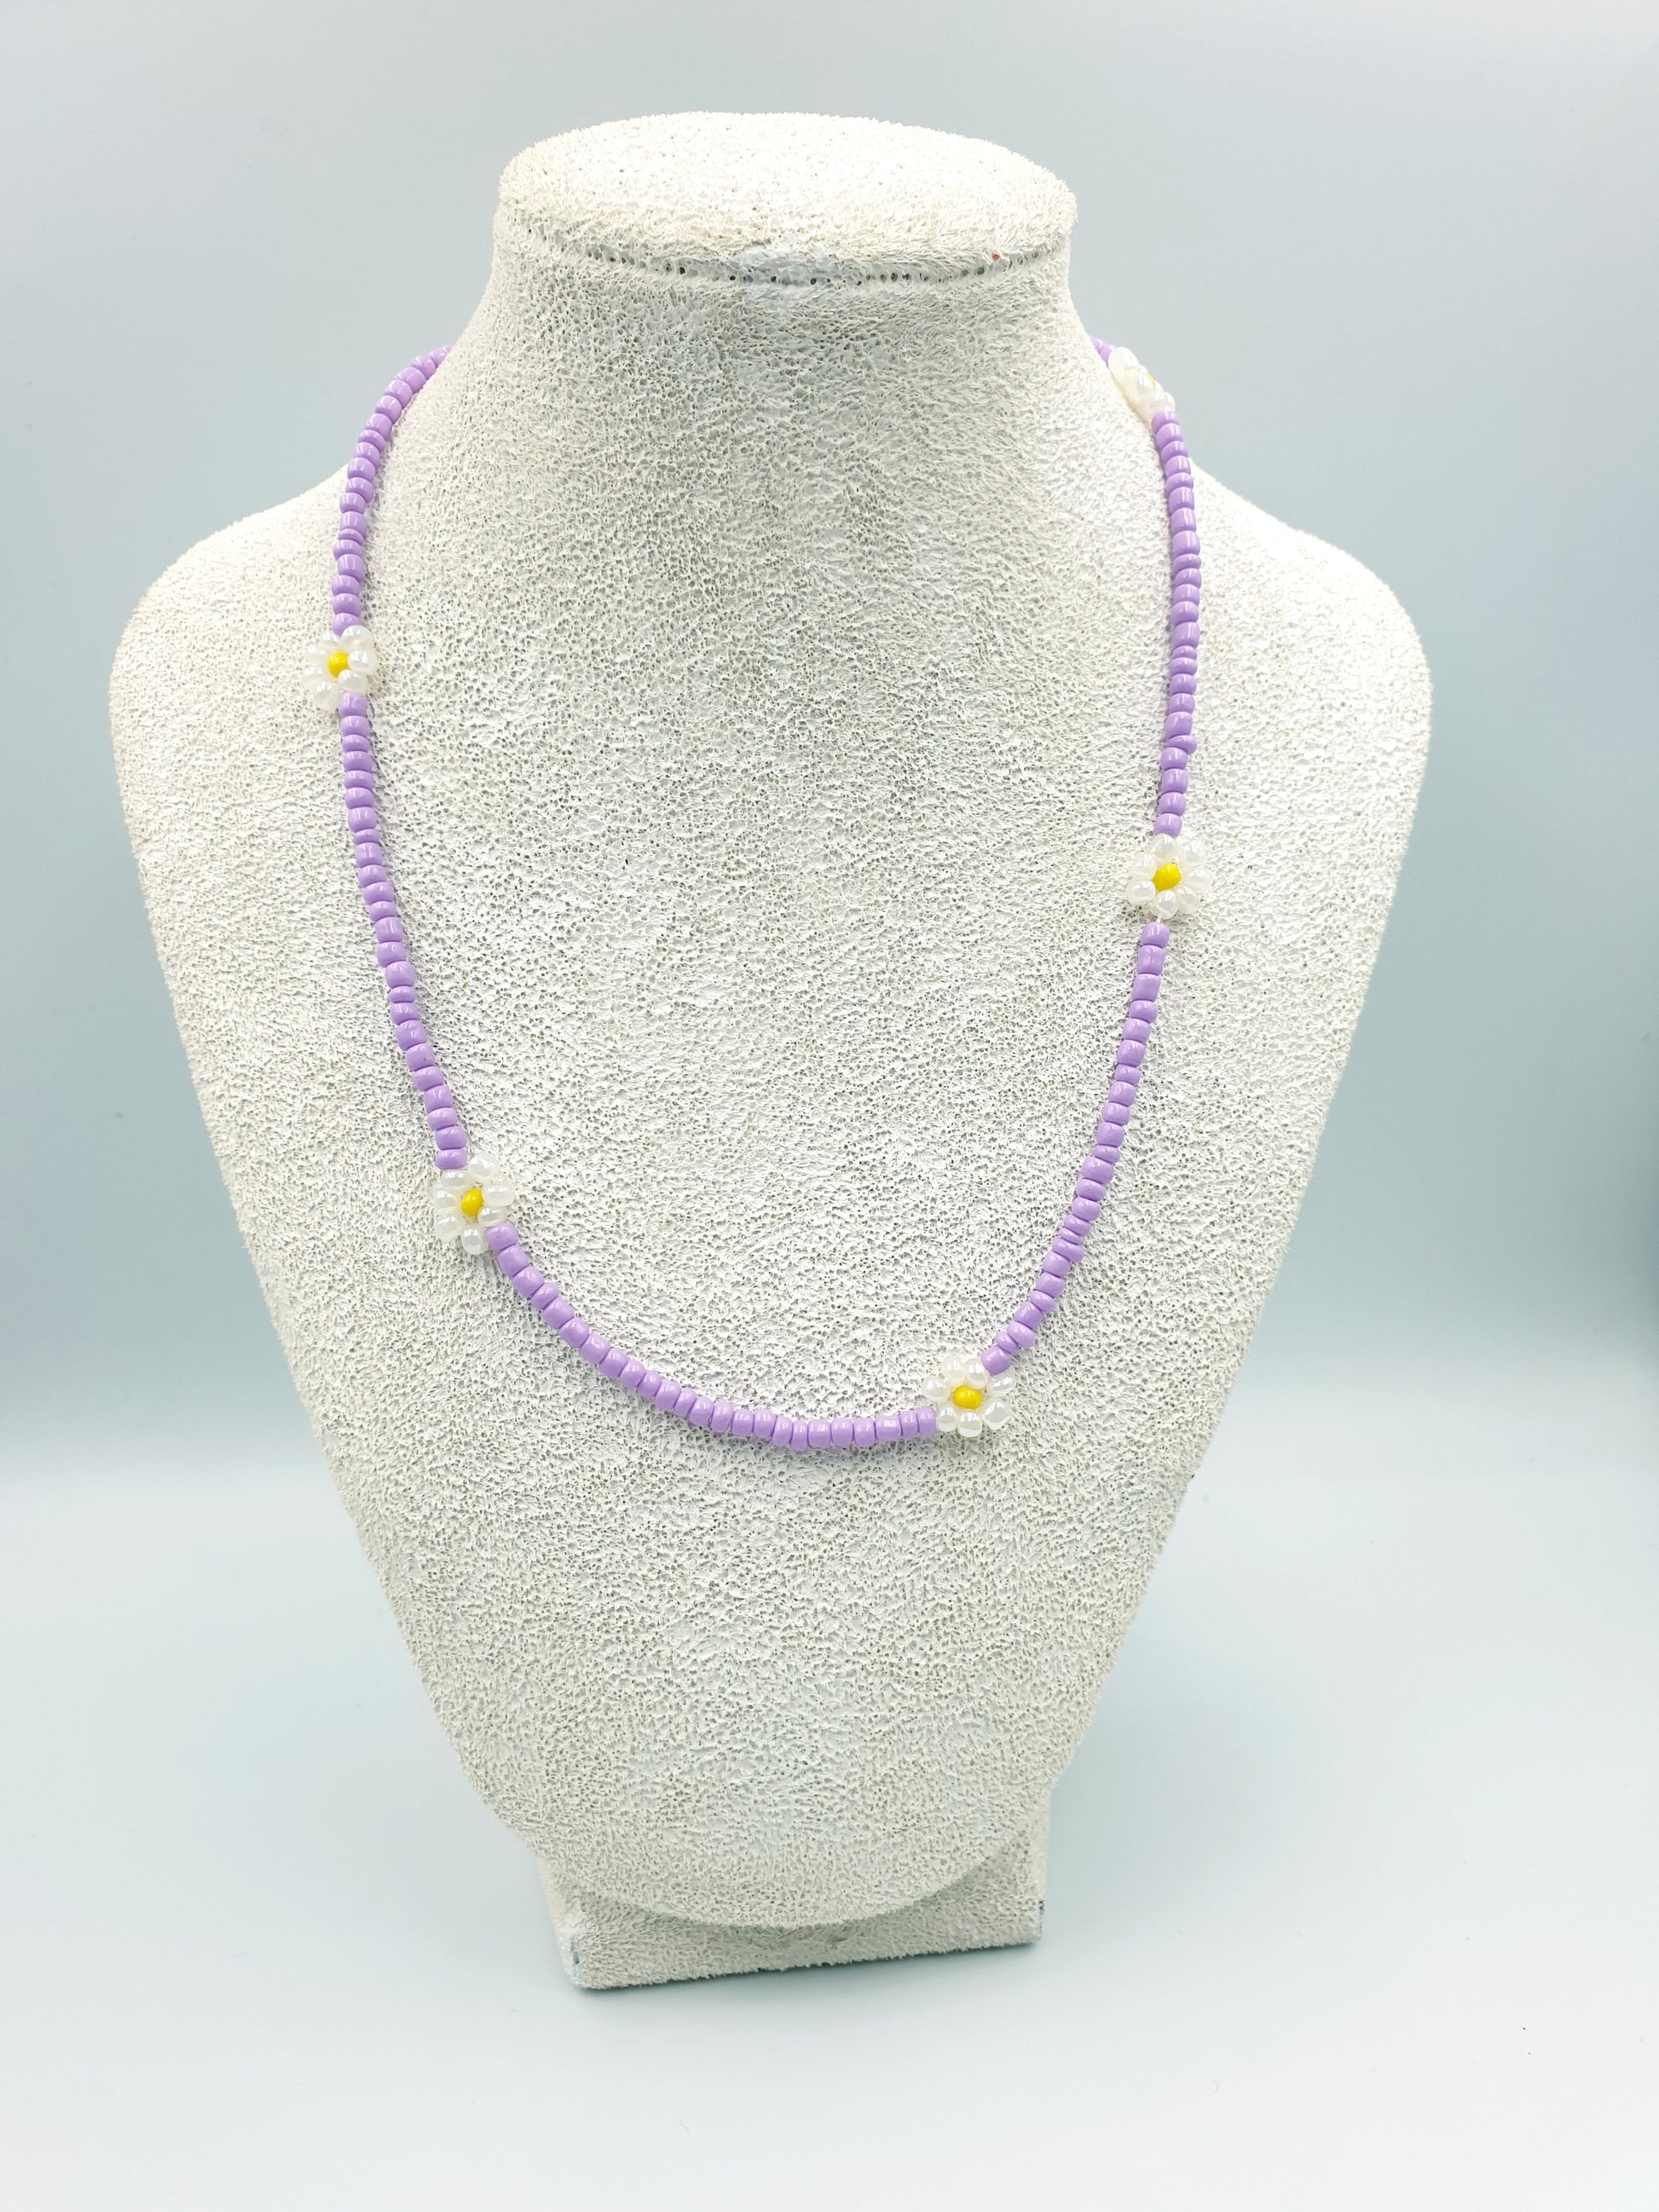 Beaded flower necklace, flower beads, beaded necklace, flower power, girls jewelery, ladies necklace, flower choker necklace, unique gifts, popular, 90s vibes, boho, bohemian jewellery